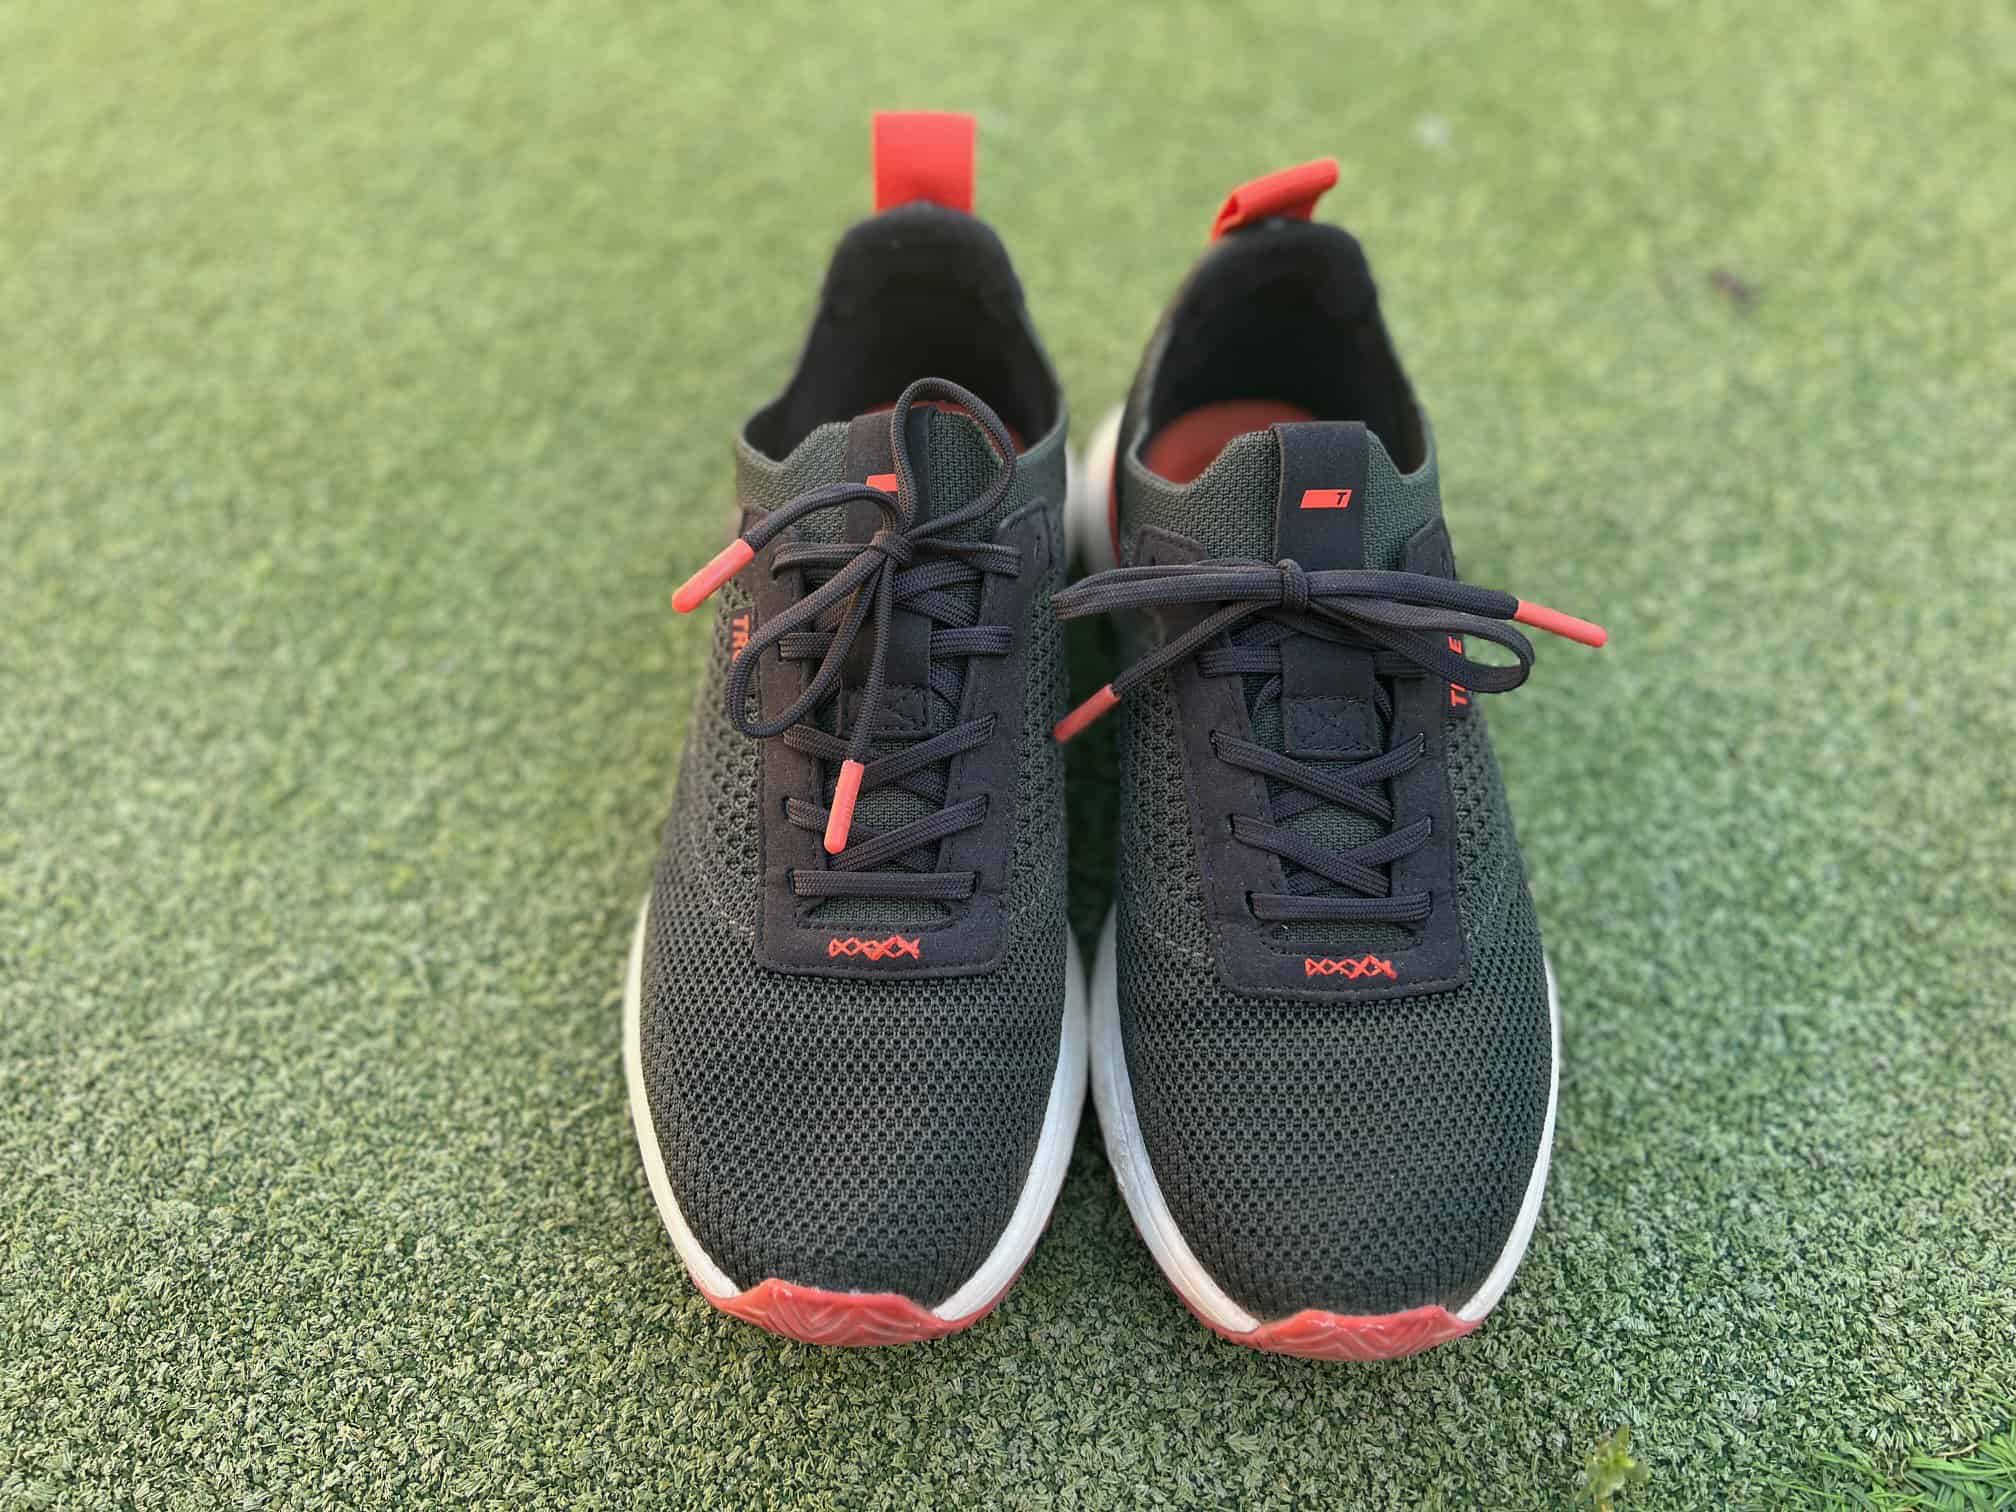 TRUE All Day Knit 3 Shoes Review - Independent Golf Reviews